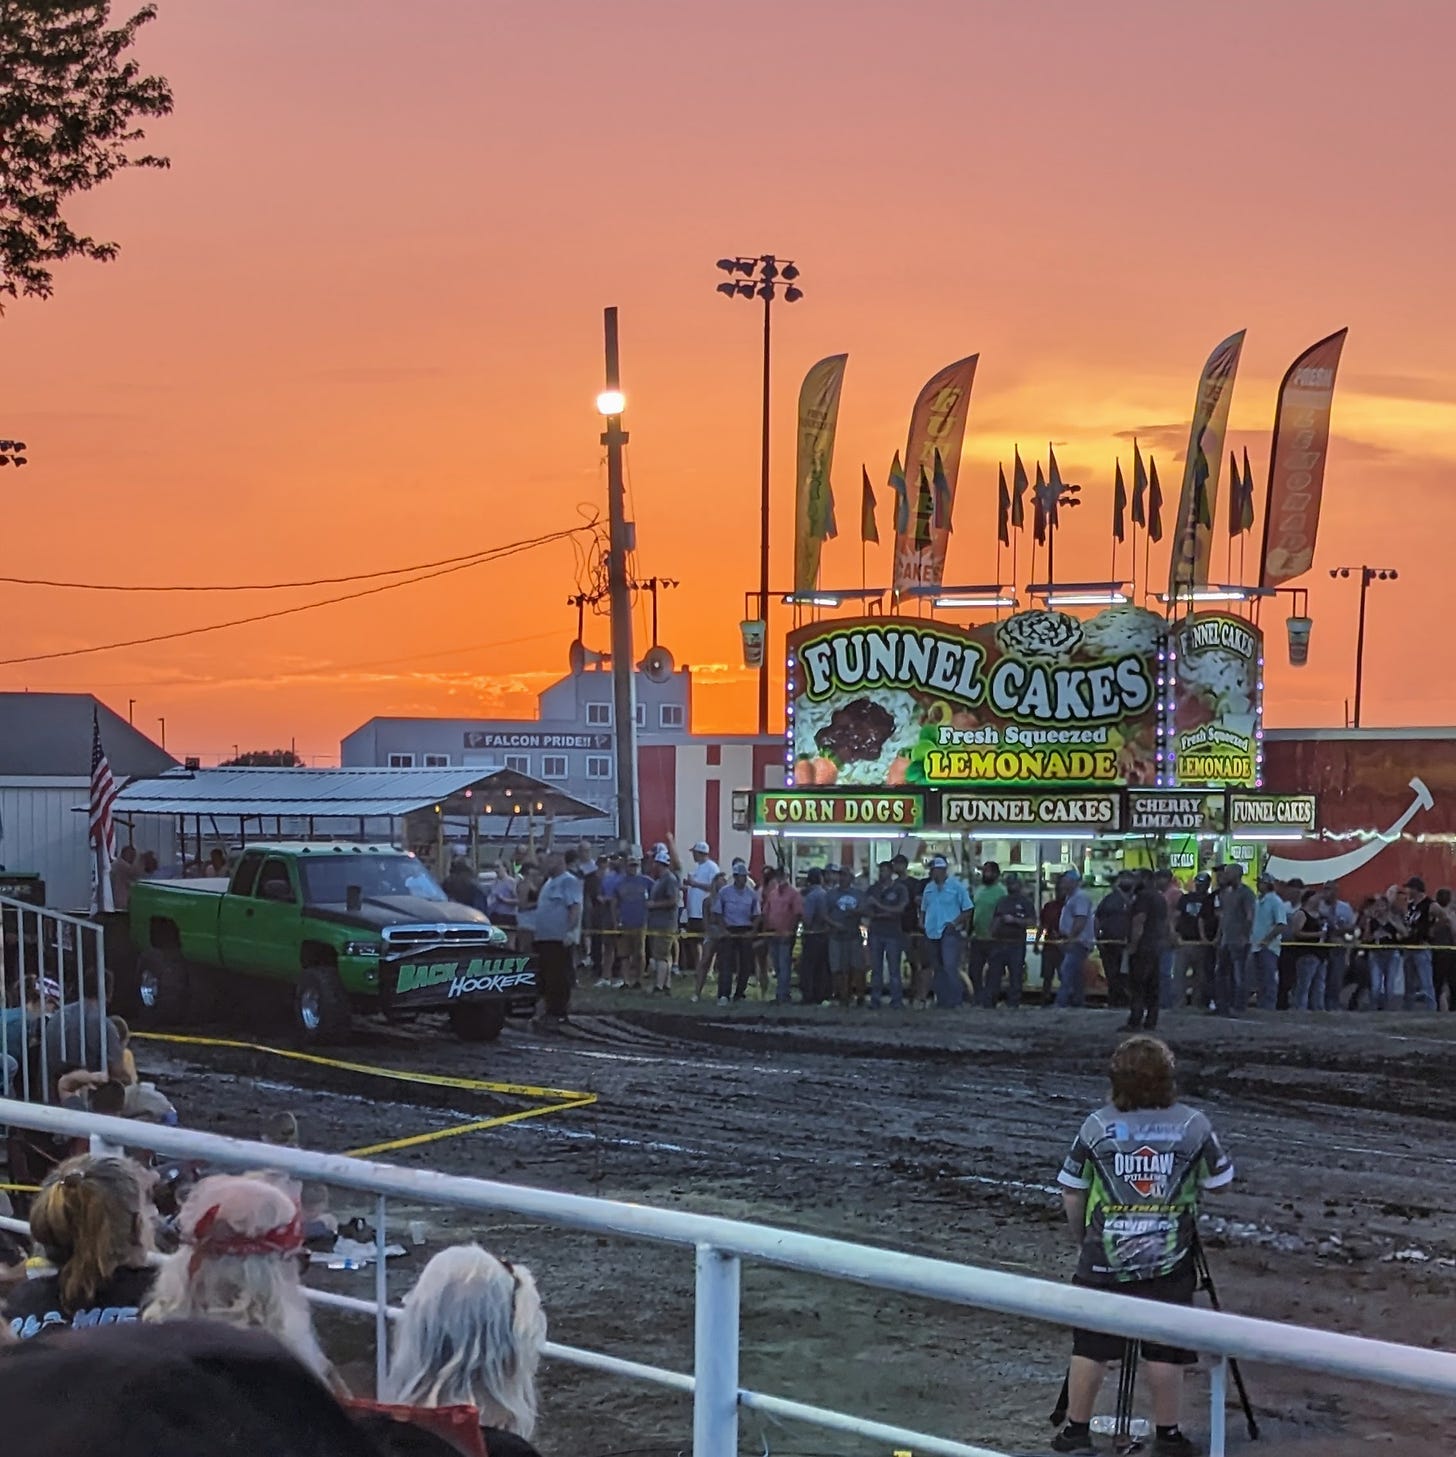 A green truck getting ready to pull a weighted sled across a dirt field. A funnel cake stand is behind it, and the sun it setting.